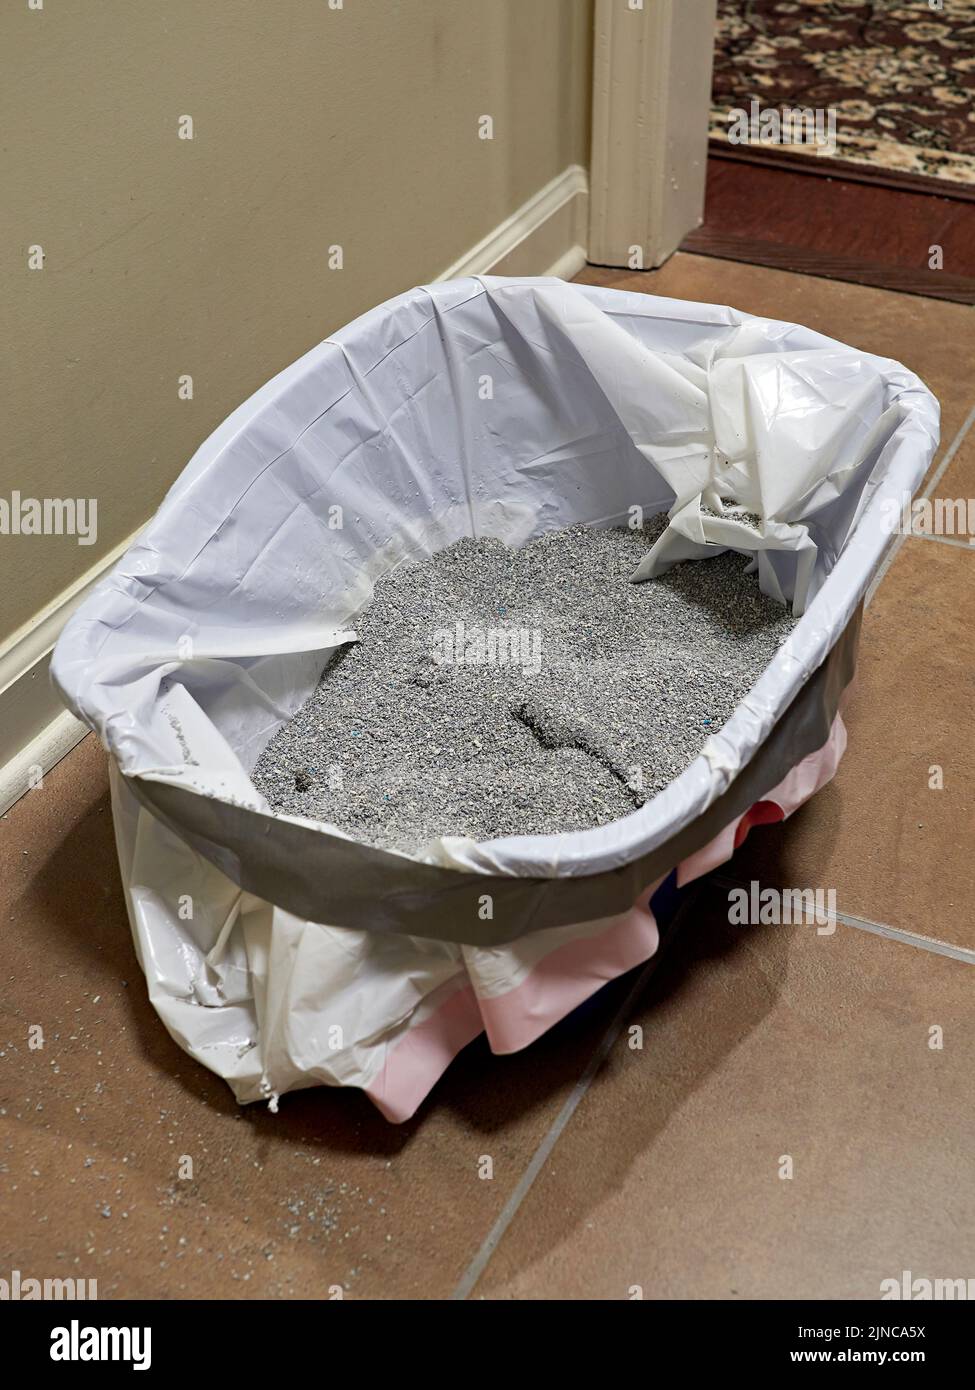 Dirty used kitty or cat litter in a kitty litter cat box. Stock Photo